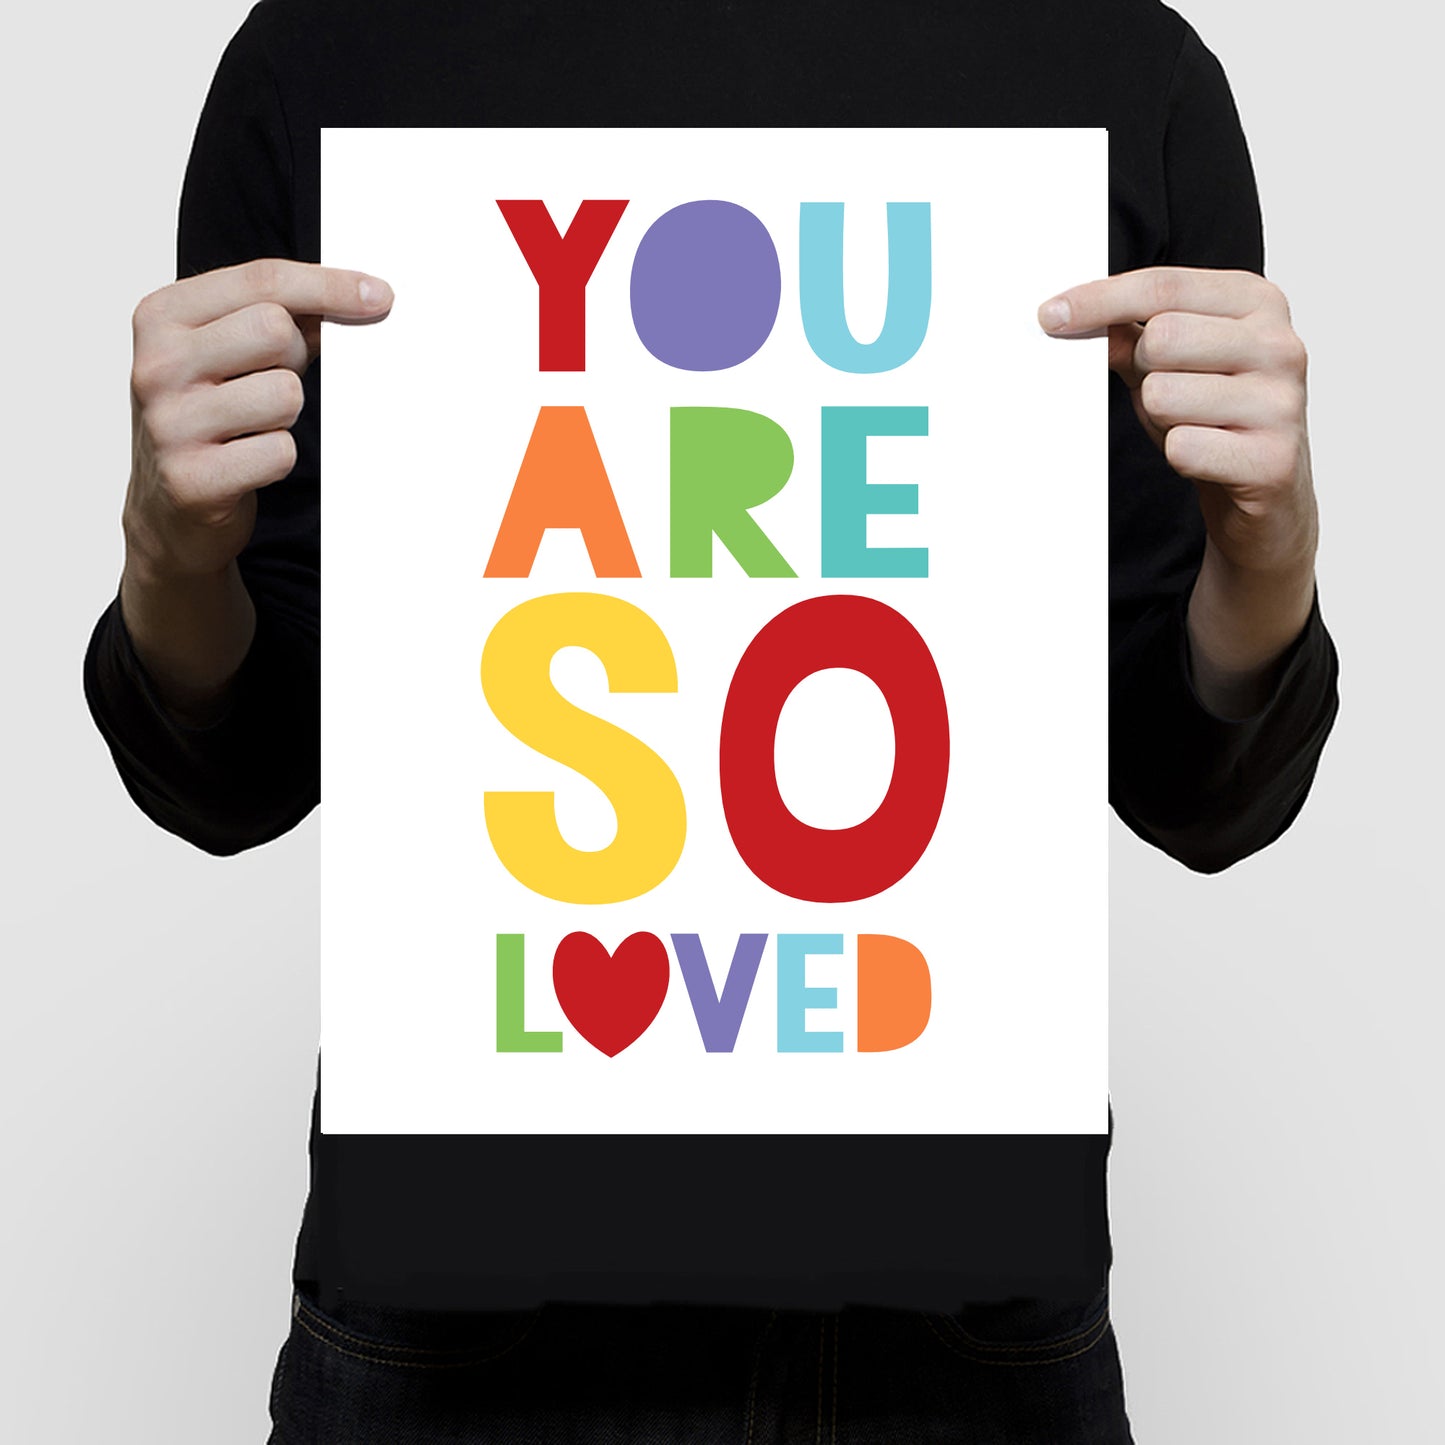 You are so loved print